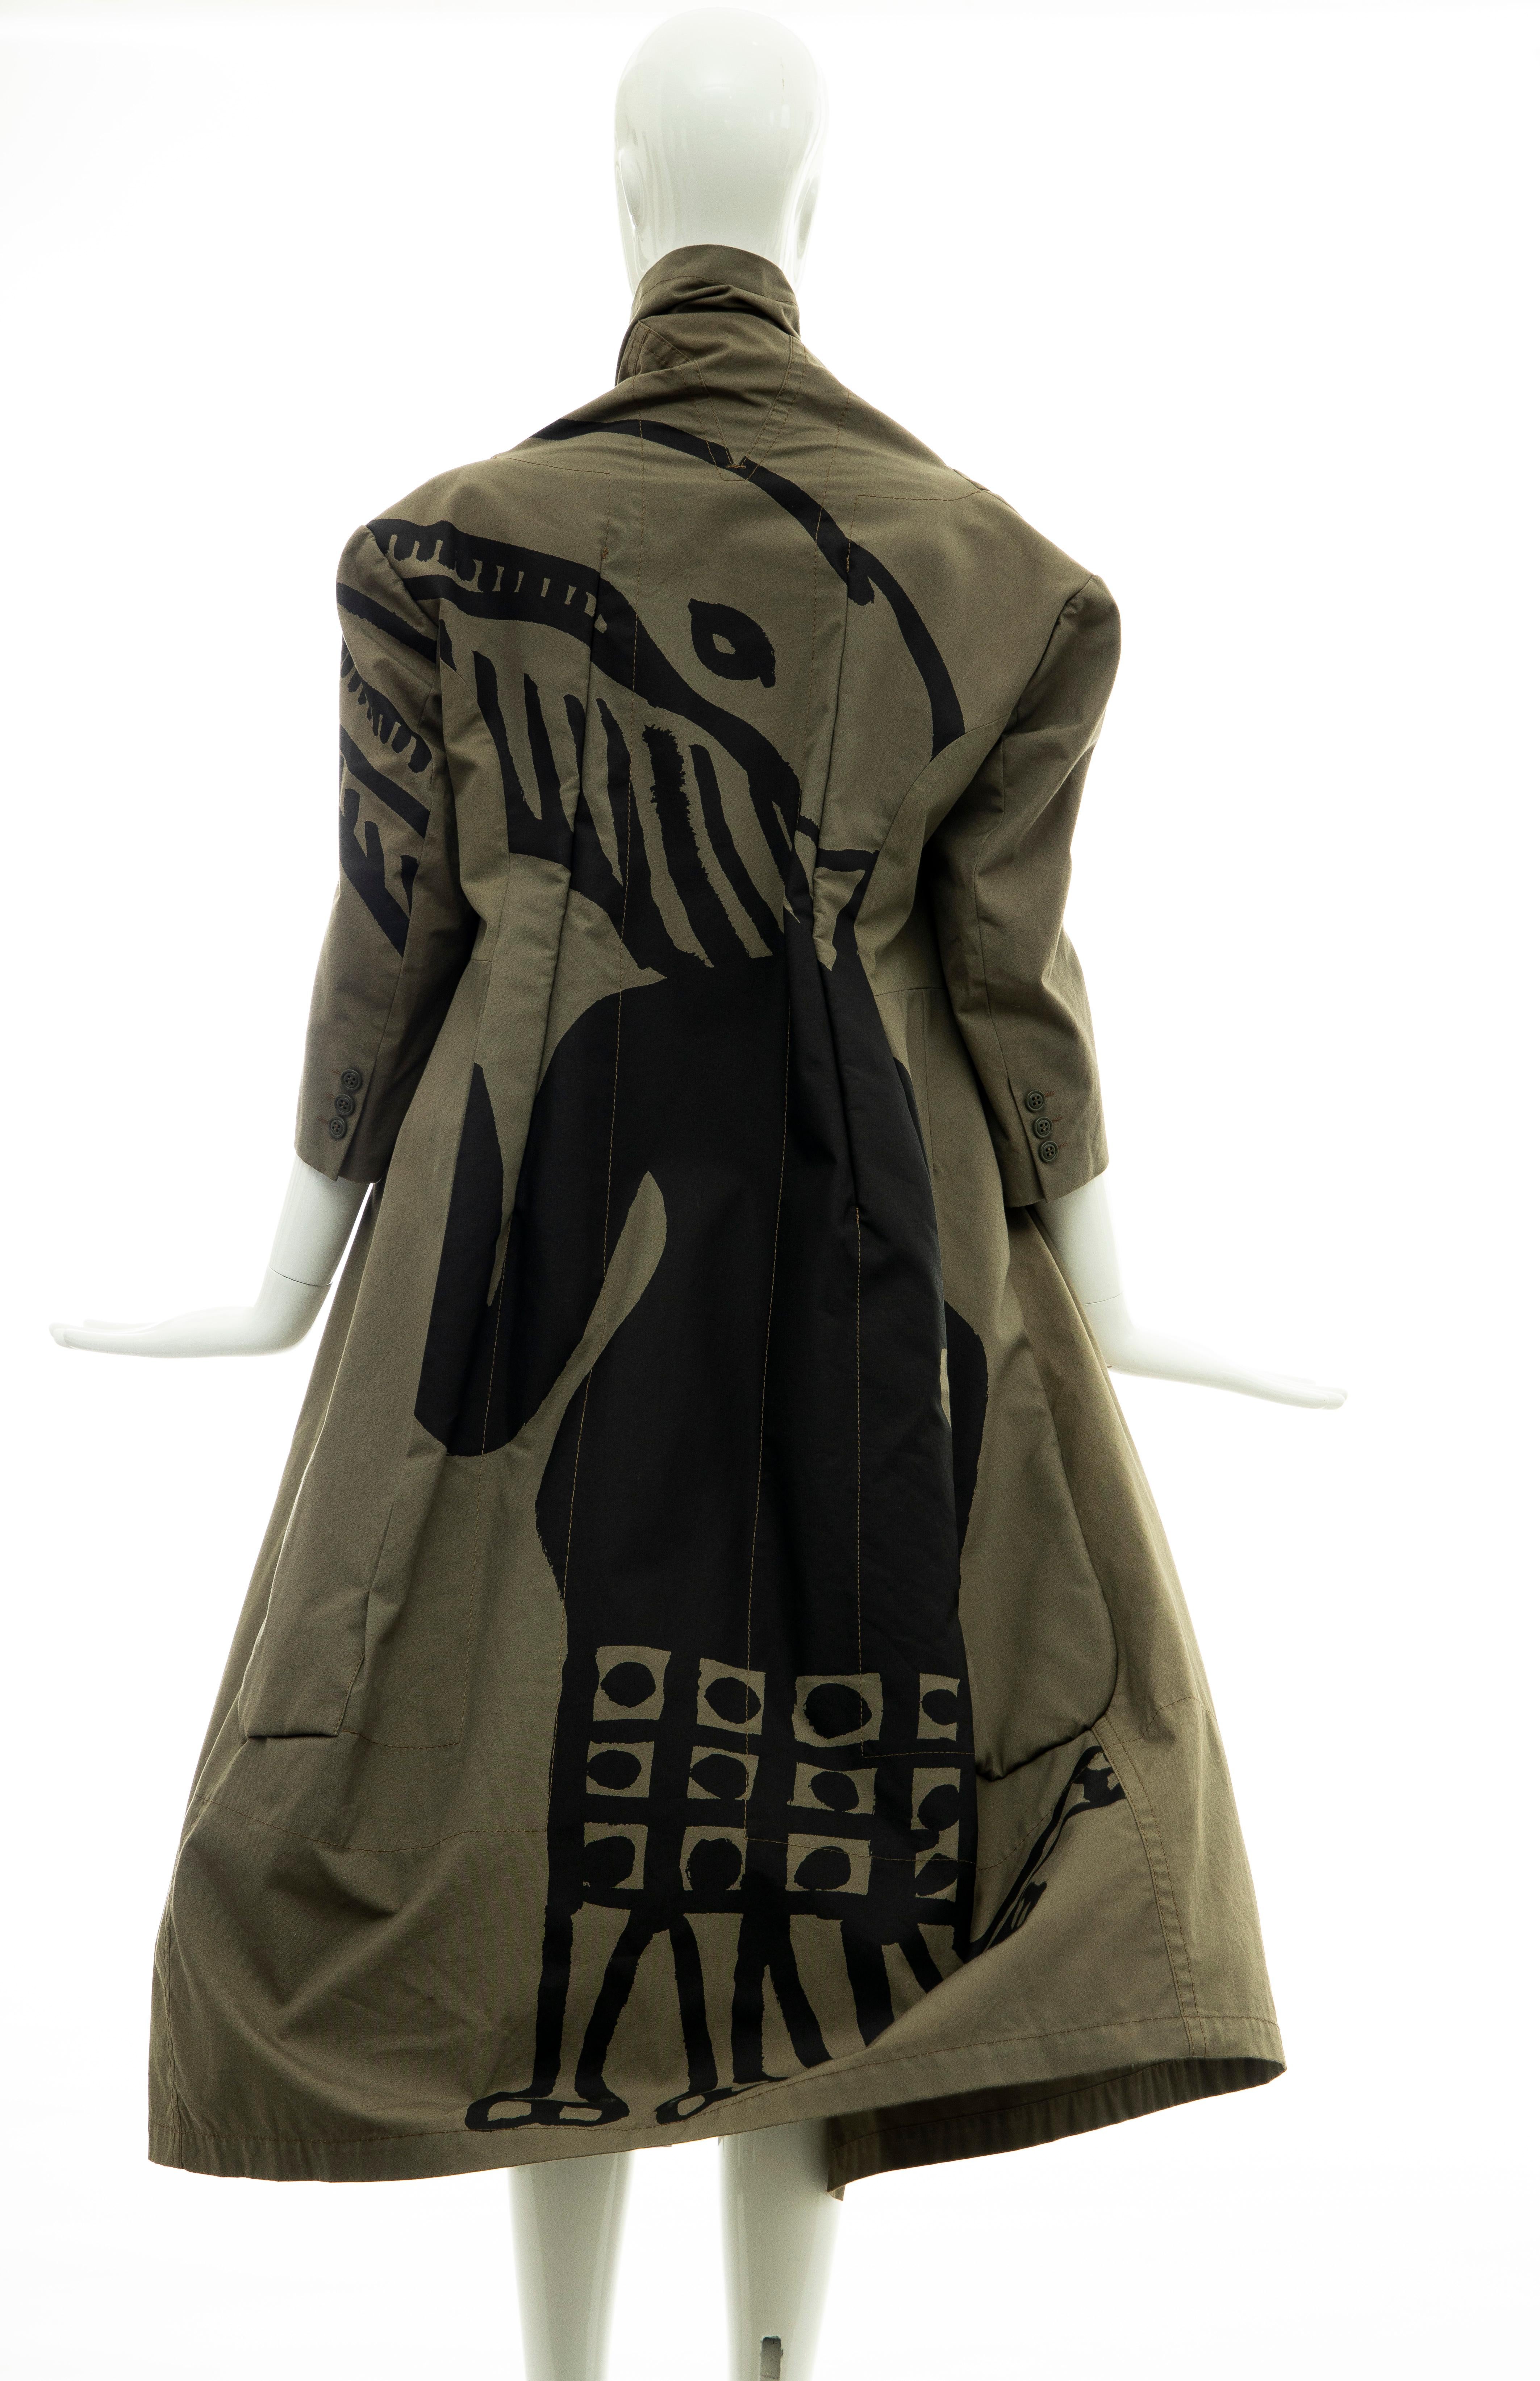 Comme des Garçons Runway (Look 8) Fall 2009, olive green coat with graphic print at back, three-quarter length sleeves, brown seamed faux pockets, padded lapels, olive brown and olive green patchwork deconstructed interior, dual interior pockets and